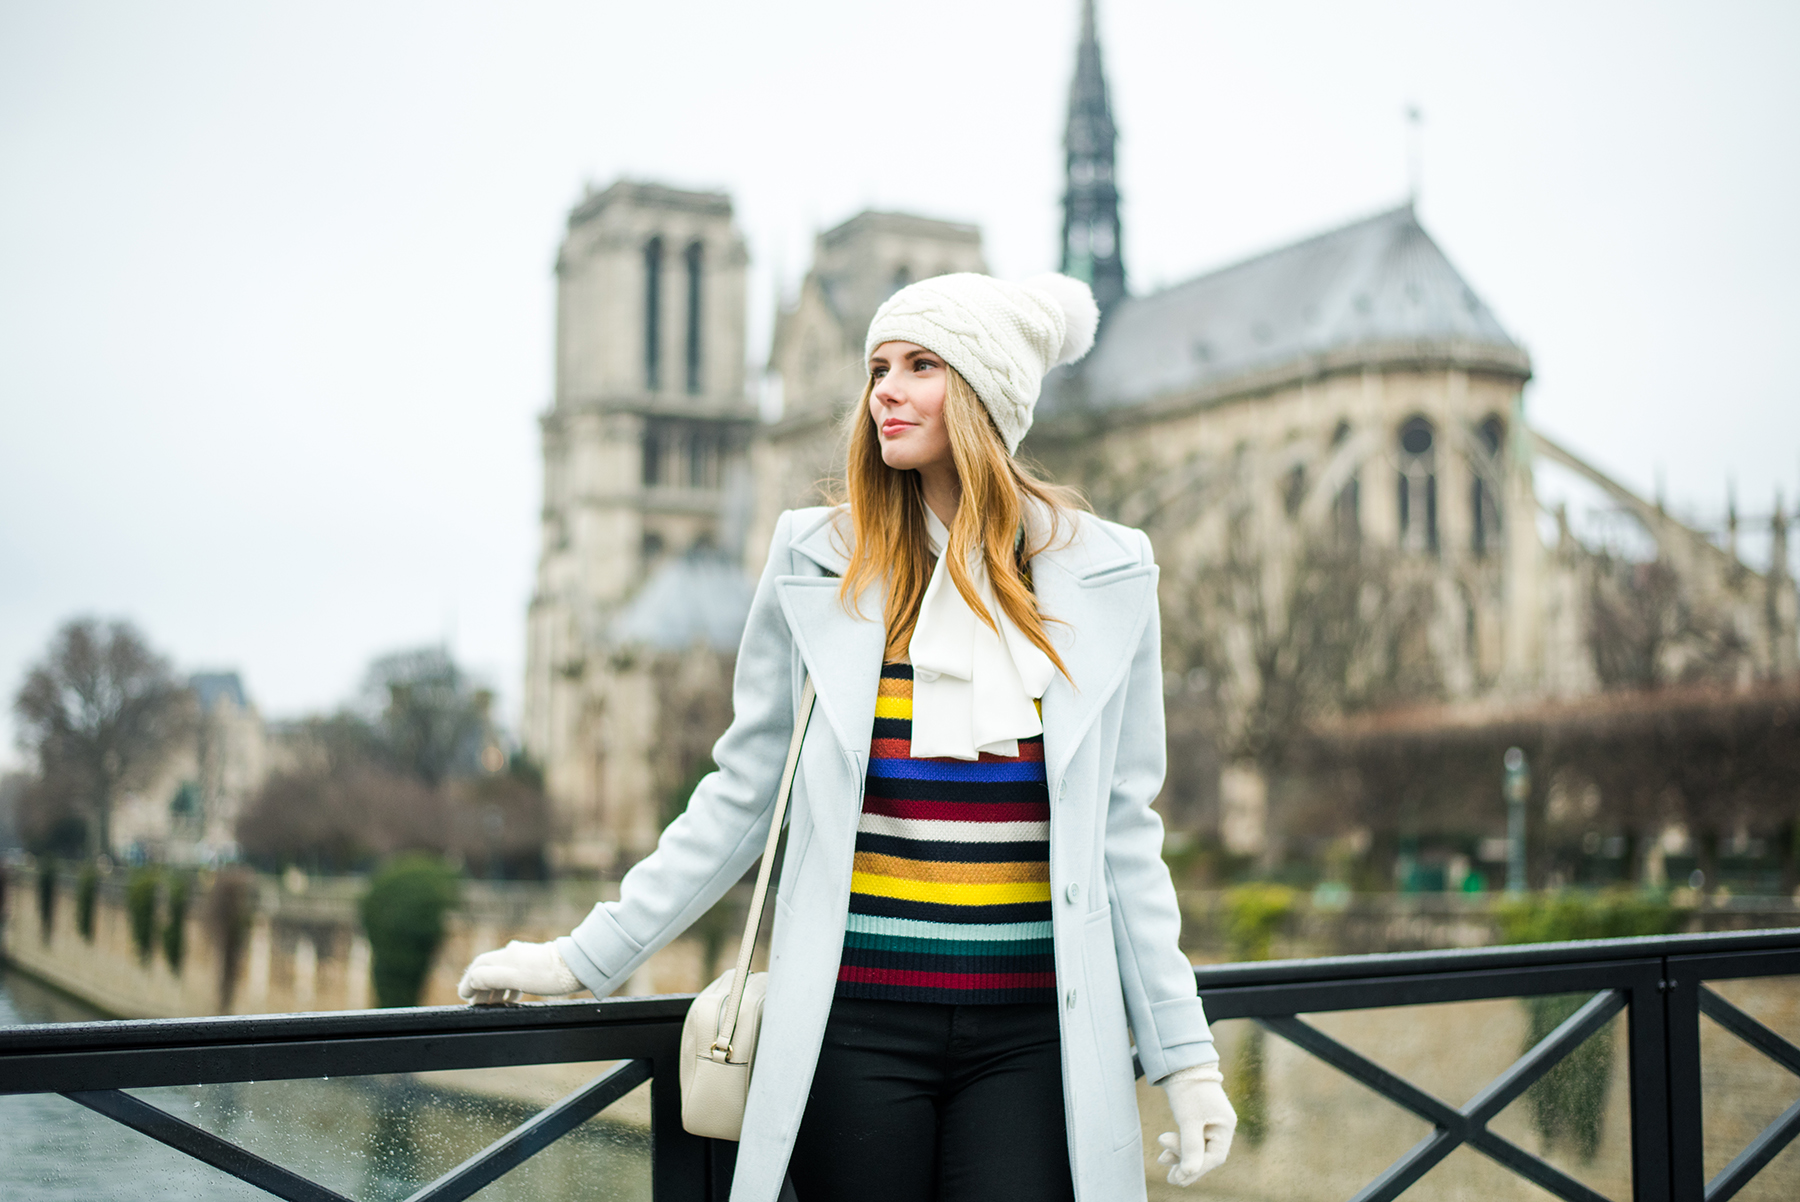 Miss USA 2011 Alyssa Campanella of The A List blog gives a guide to Paris in 48 hours